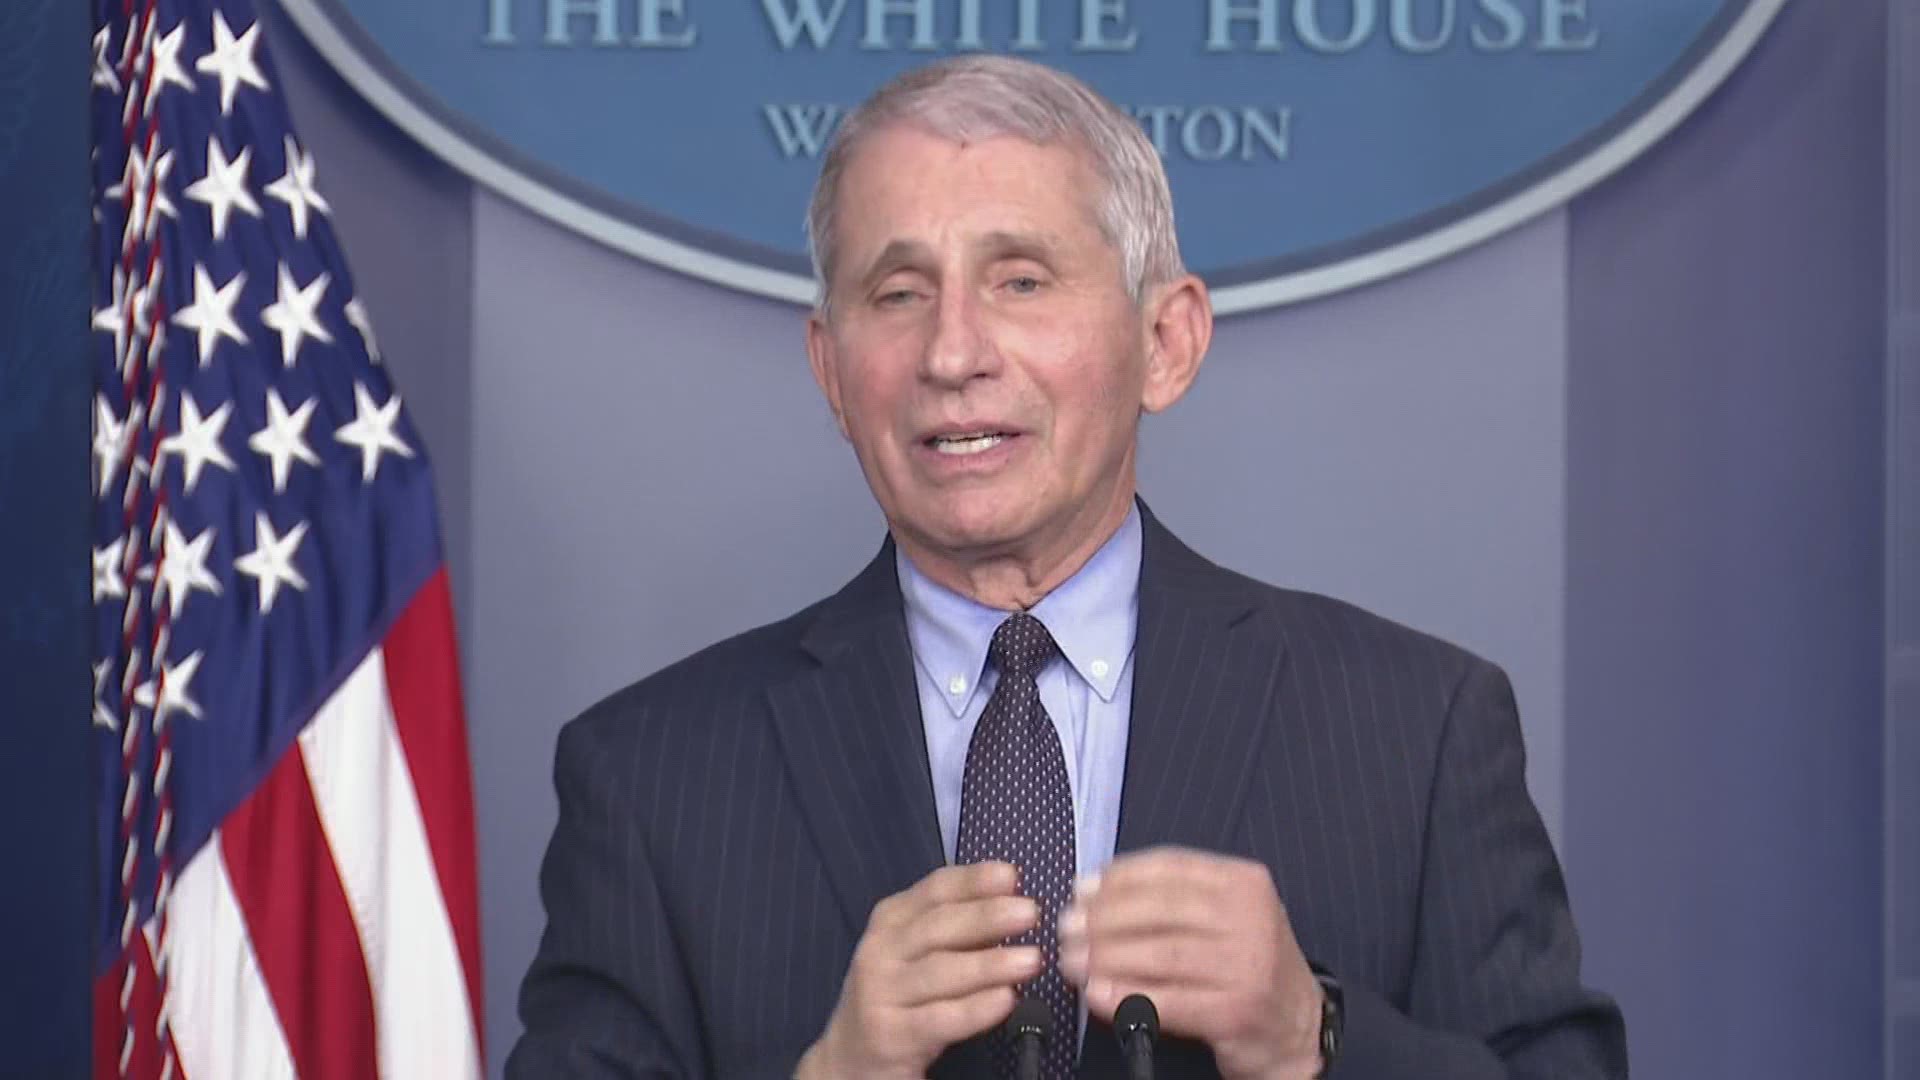 On the first full day of the Biden presidency, Dr. Anthony Fauci spoke to reporters about the current status of the COVID-19 pandemic.